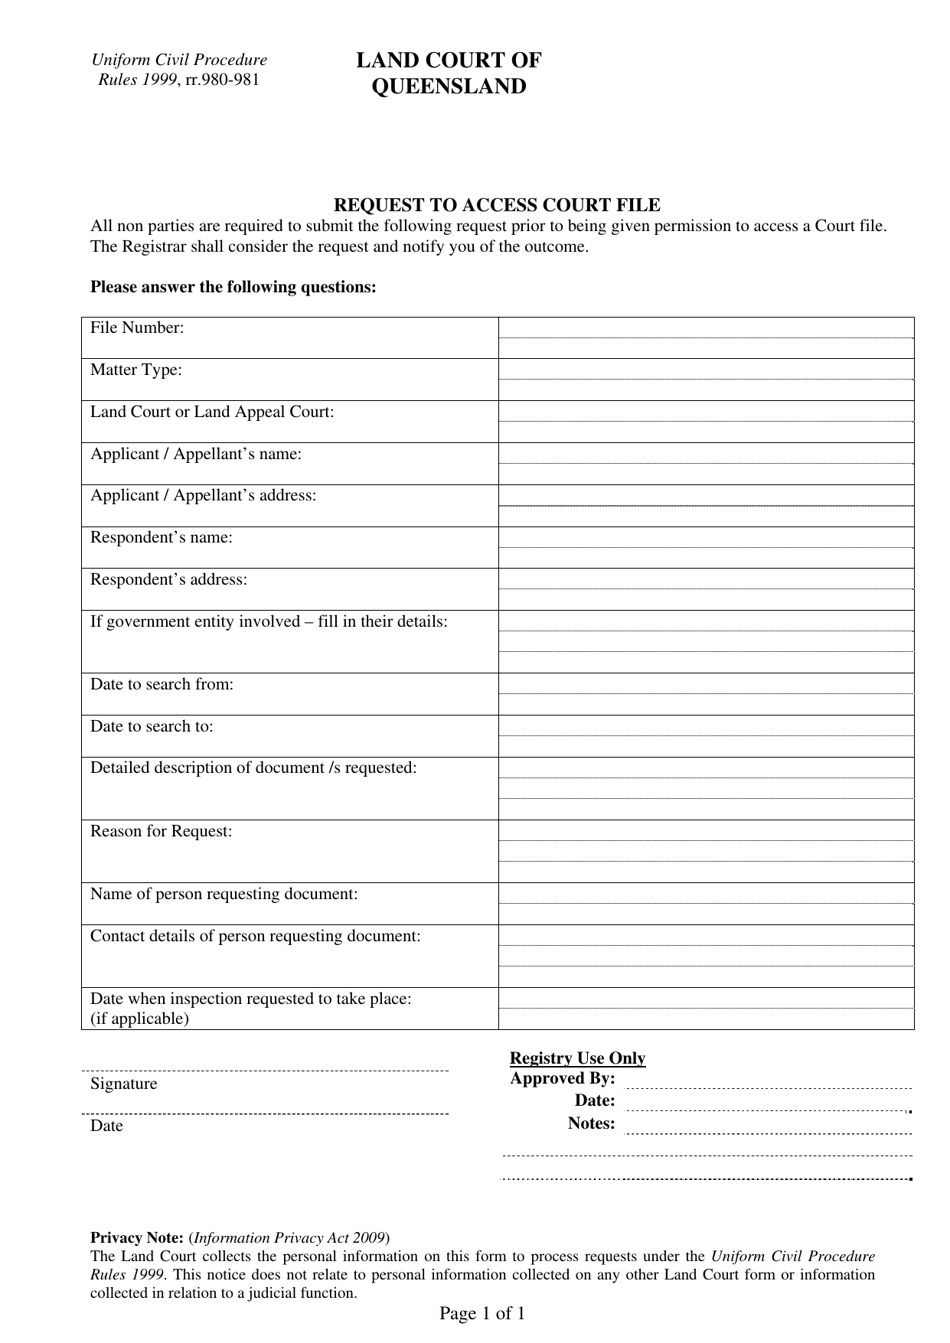 Request to Access Court File Form - Queensland, Australia, Page 1